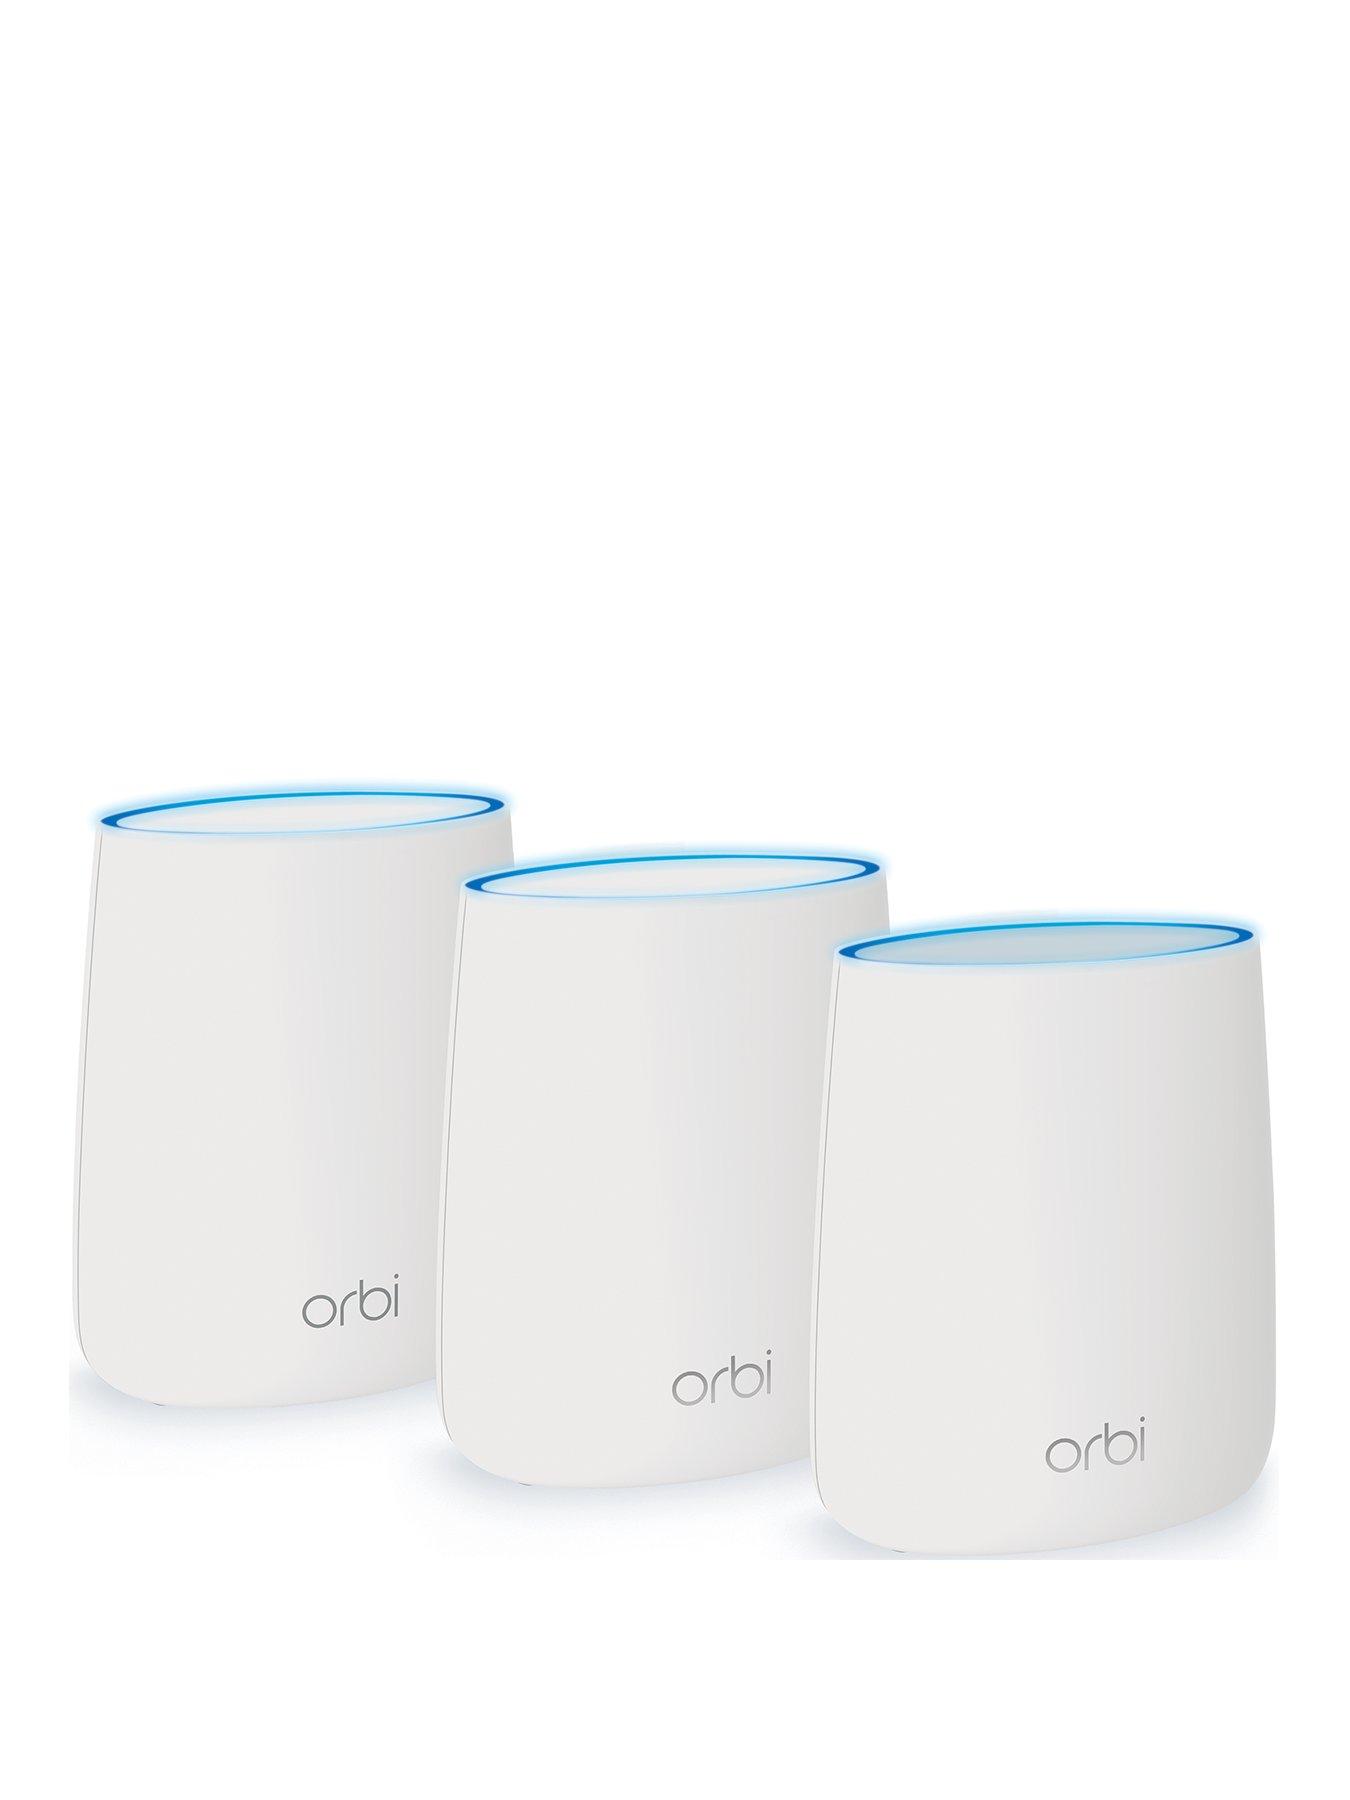 Netgear Rbk23 Orbi Whole Home Mesh Wi-Fi System (Up To 4500Sq Ft Coverage), Tri-Band Ac2200 (2.2 Gbps)